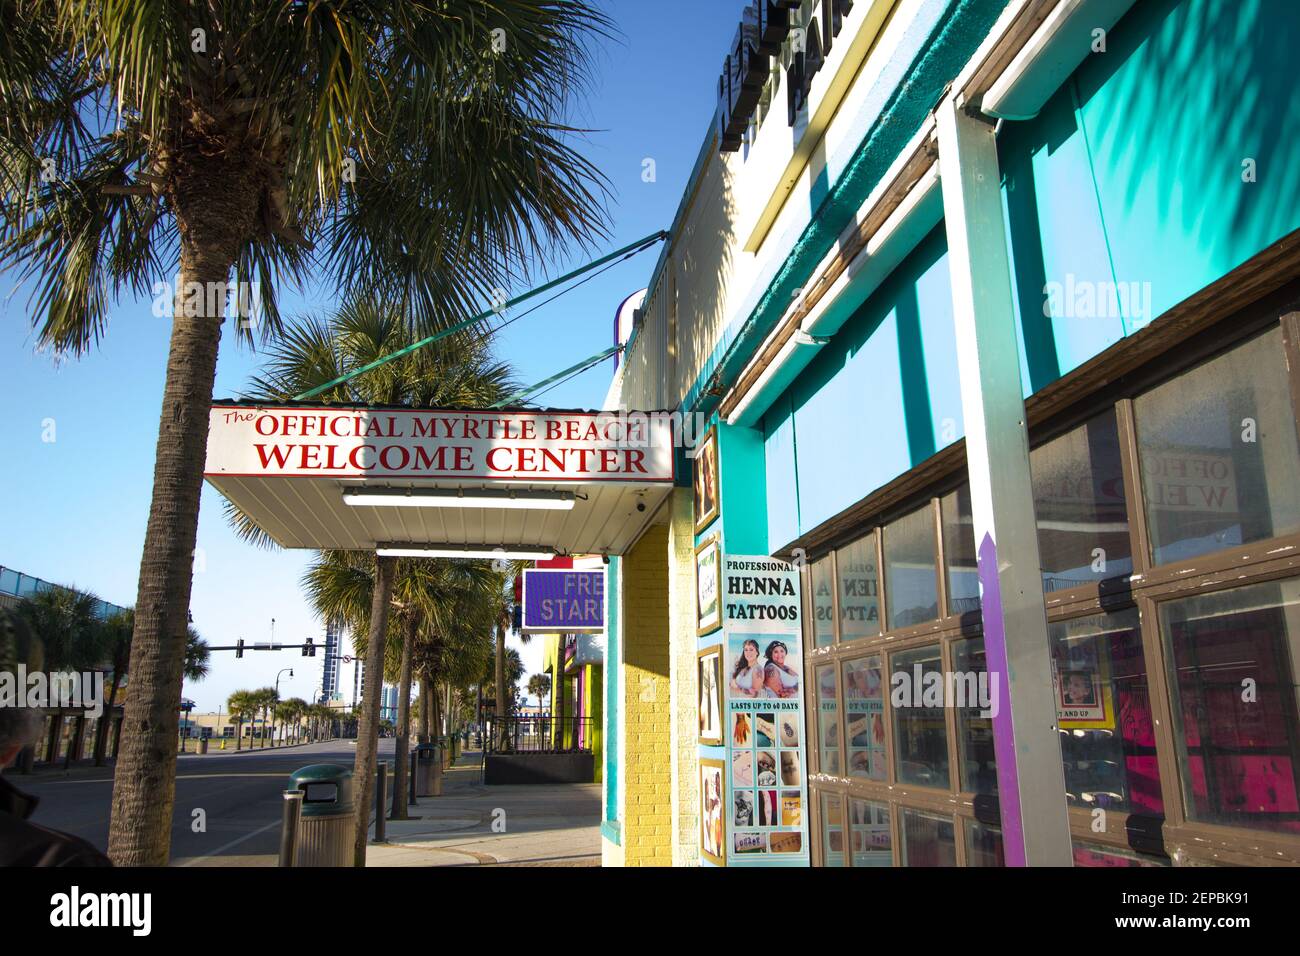 Myrtle Beach, South Carolina, USA - February 25, 2021: Sign for the official Myrtle Beach Welcome Center on Ocean Boulevard in downtown Myrtle Beach. Stock Photo